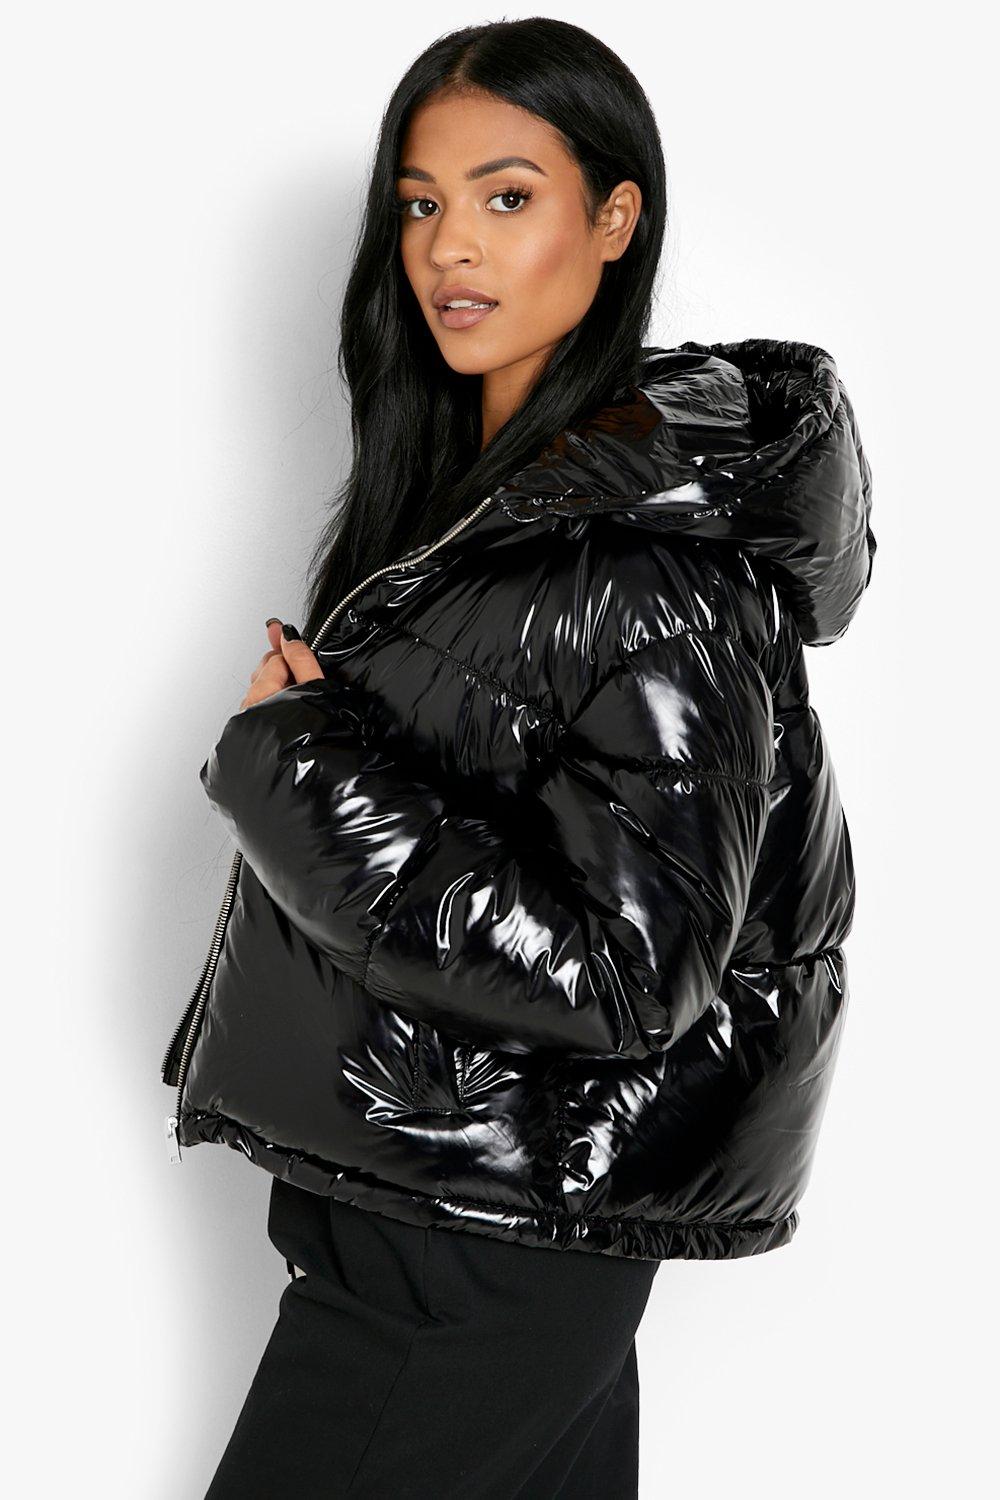  TZYY Women's Shiny Cropped Puffer Jacket, Pu Leather Metallic  Quilted Short Down Coat, Packable Light Winter Down Jacket : Clothing,  Shoes & Jewelry